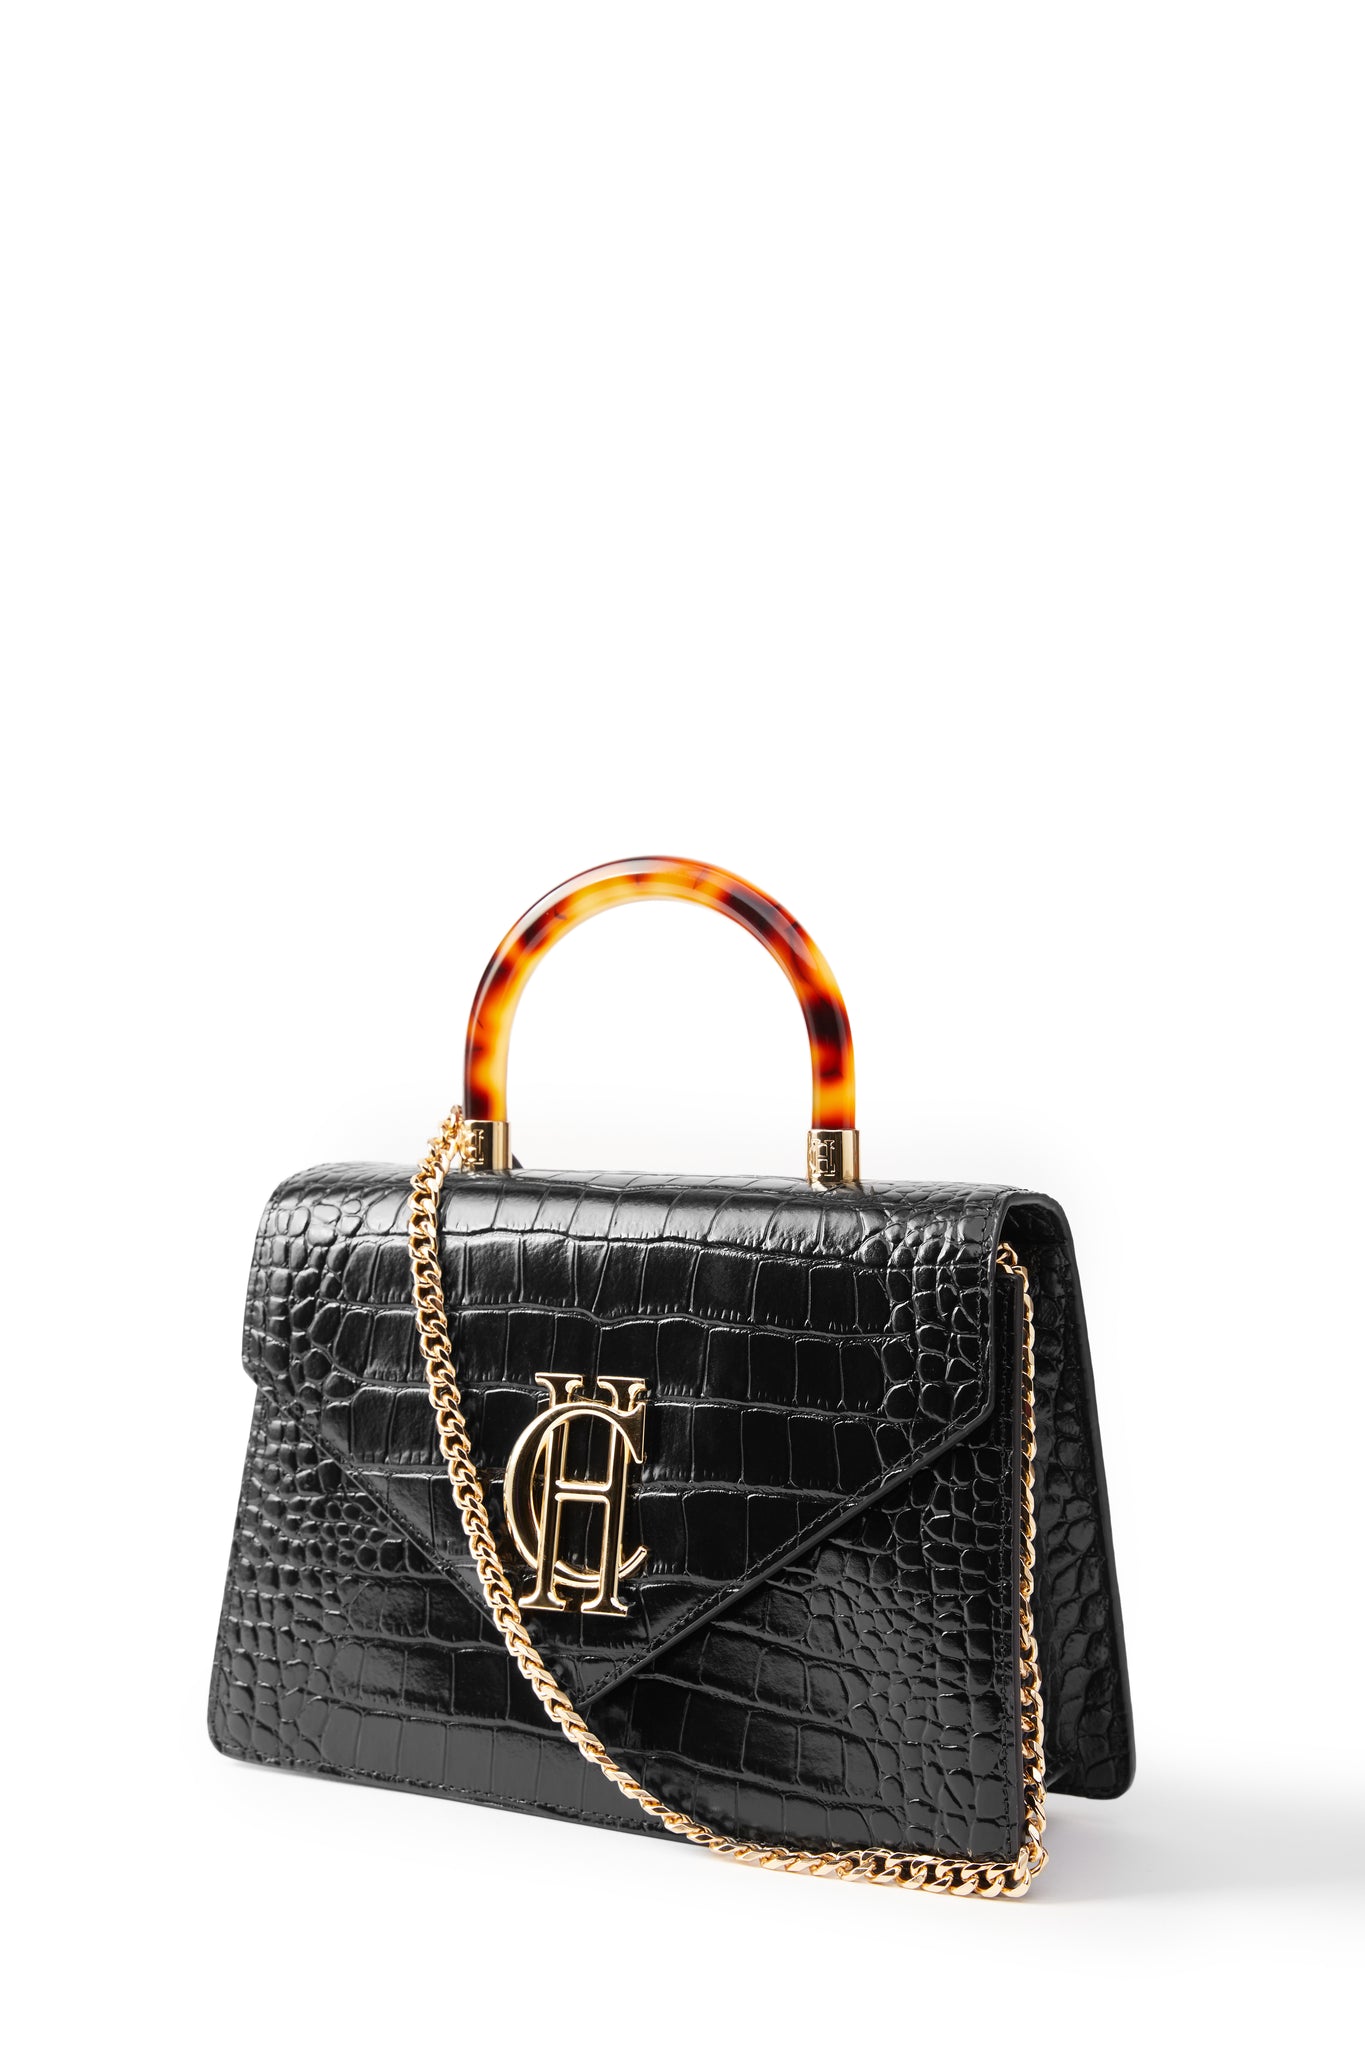 front shot of black croc embossed leather shoulder bag with acetate tortoiseshell top handle and gold chain